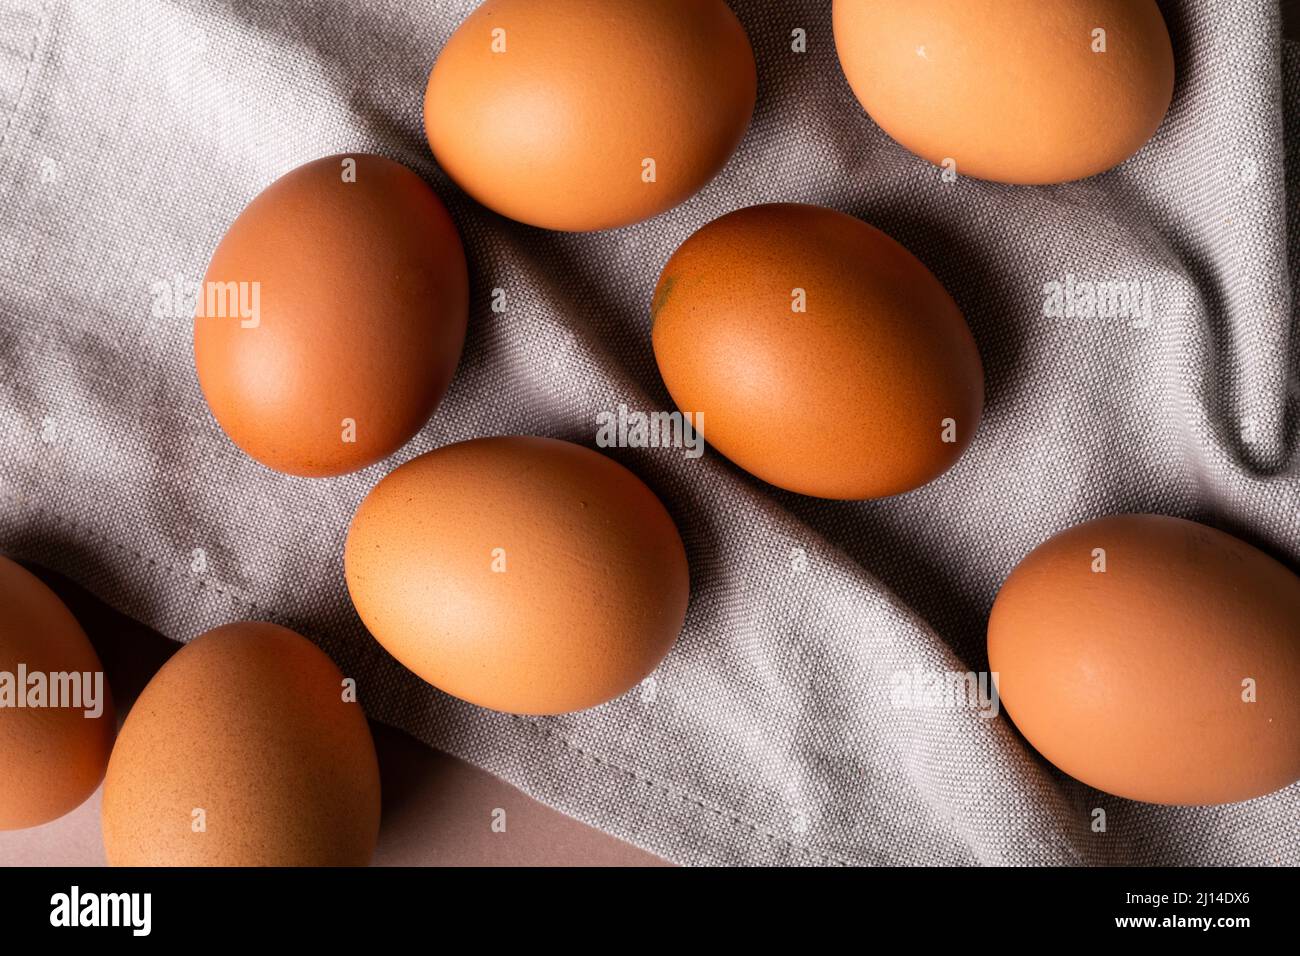 Directly above view of fresh brown eggs on gray napkin Stock Photo